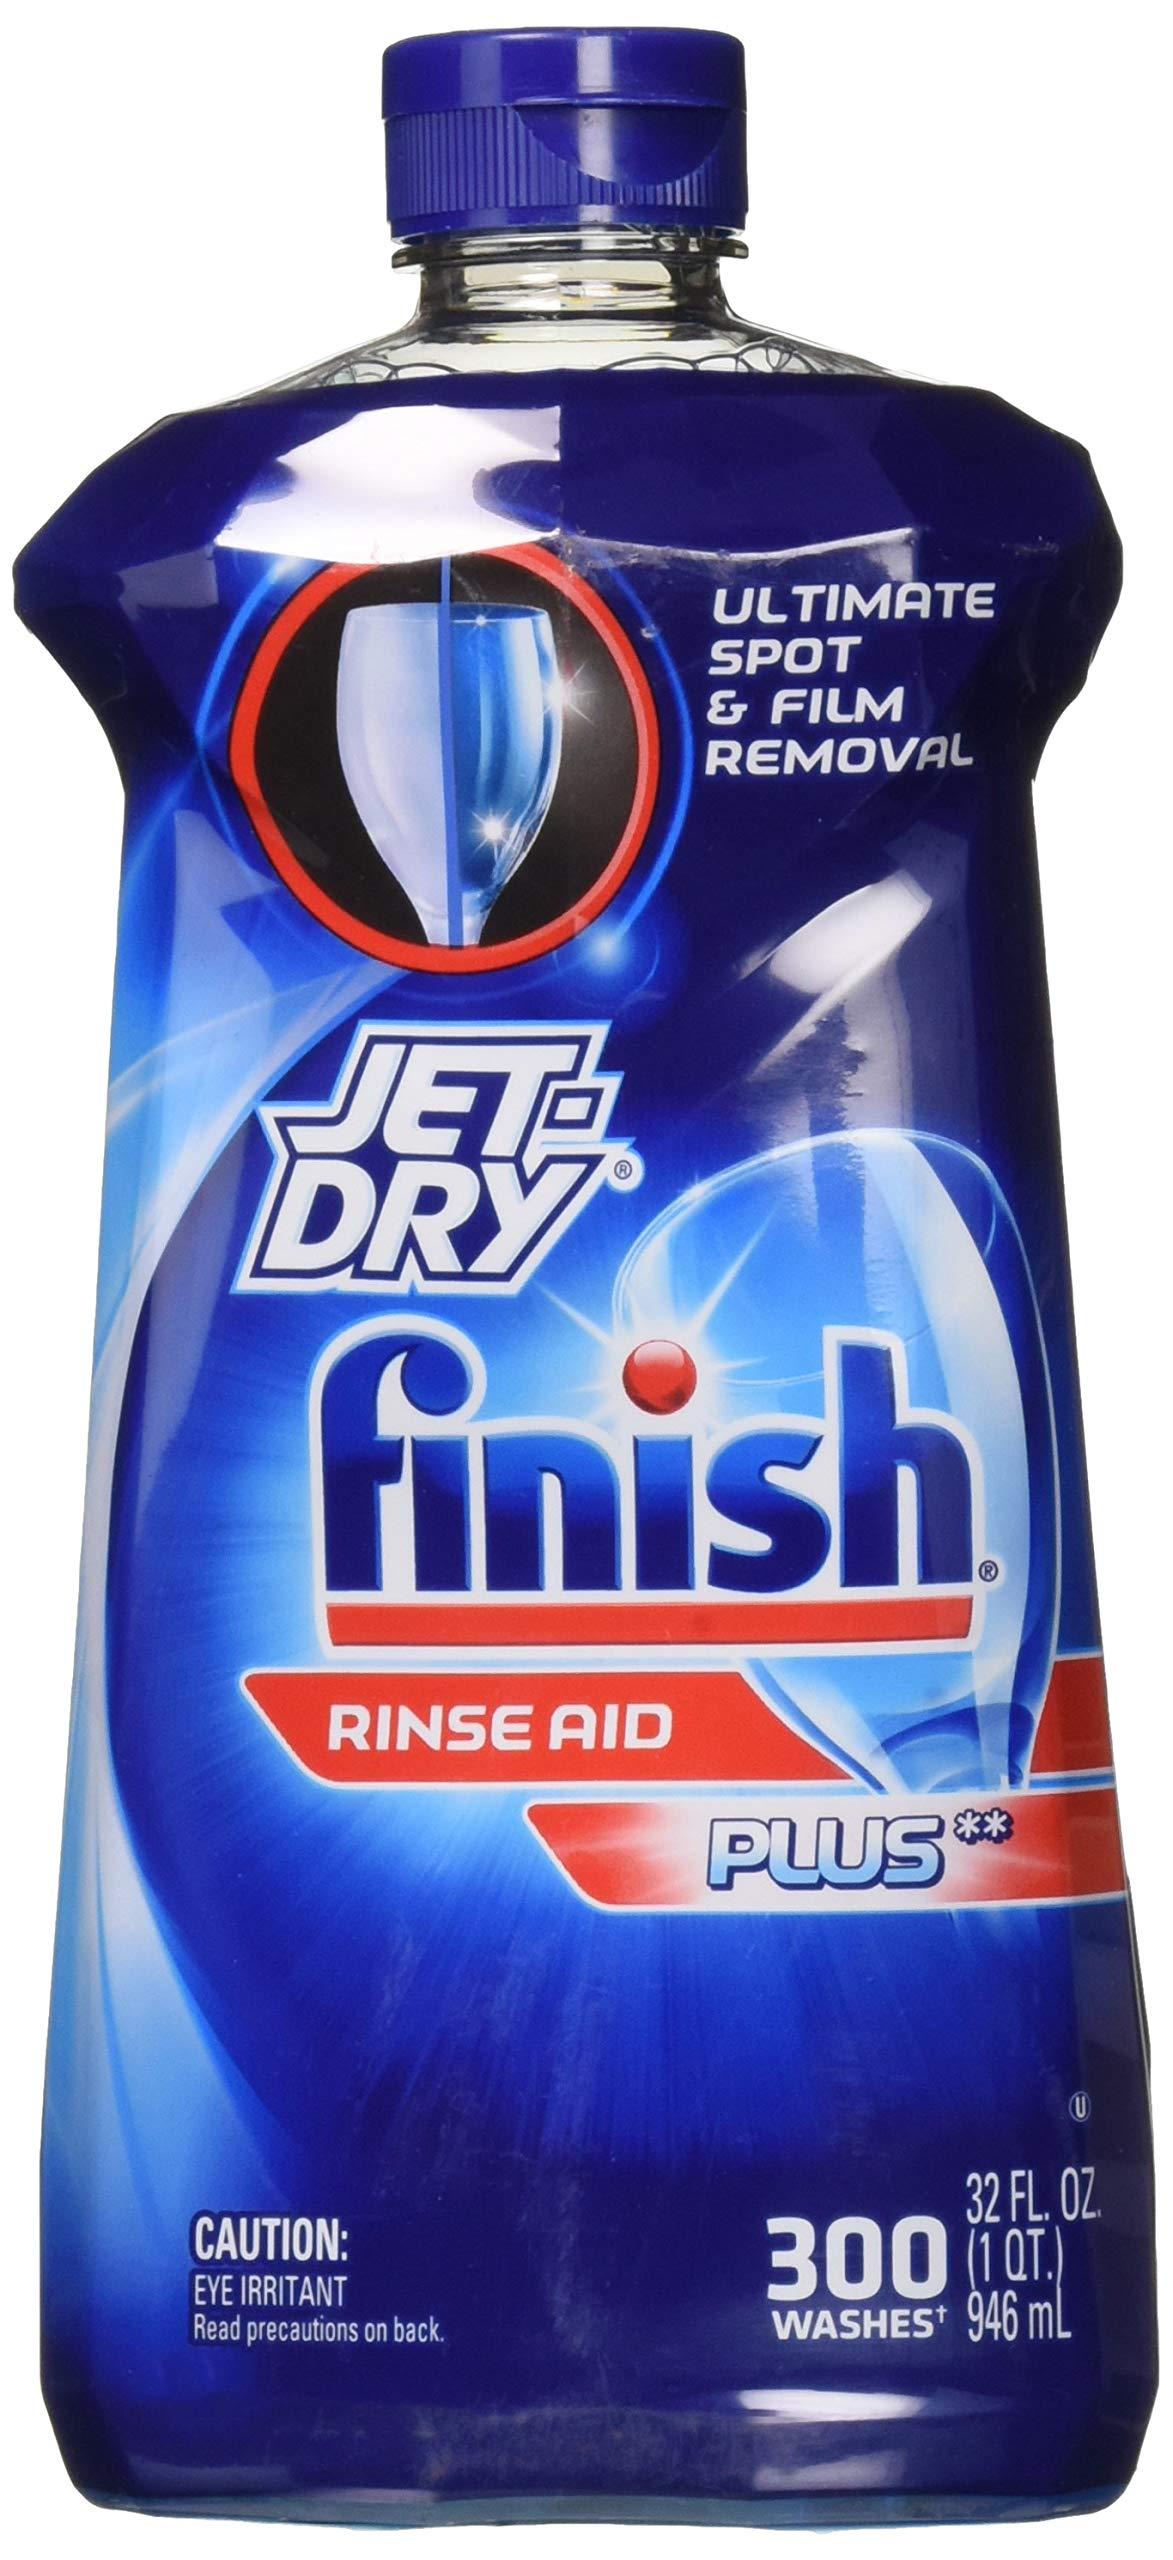 Jet Dry Rinse Agent, Unscented, Shop